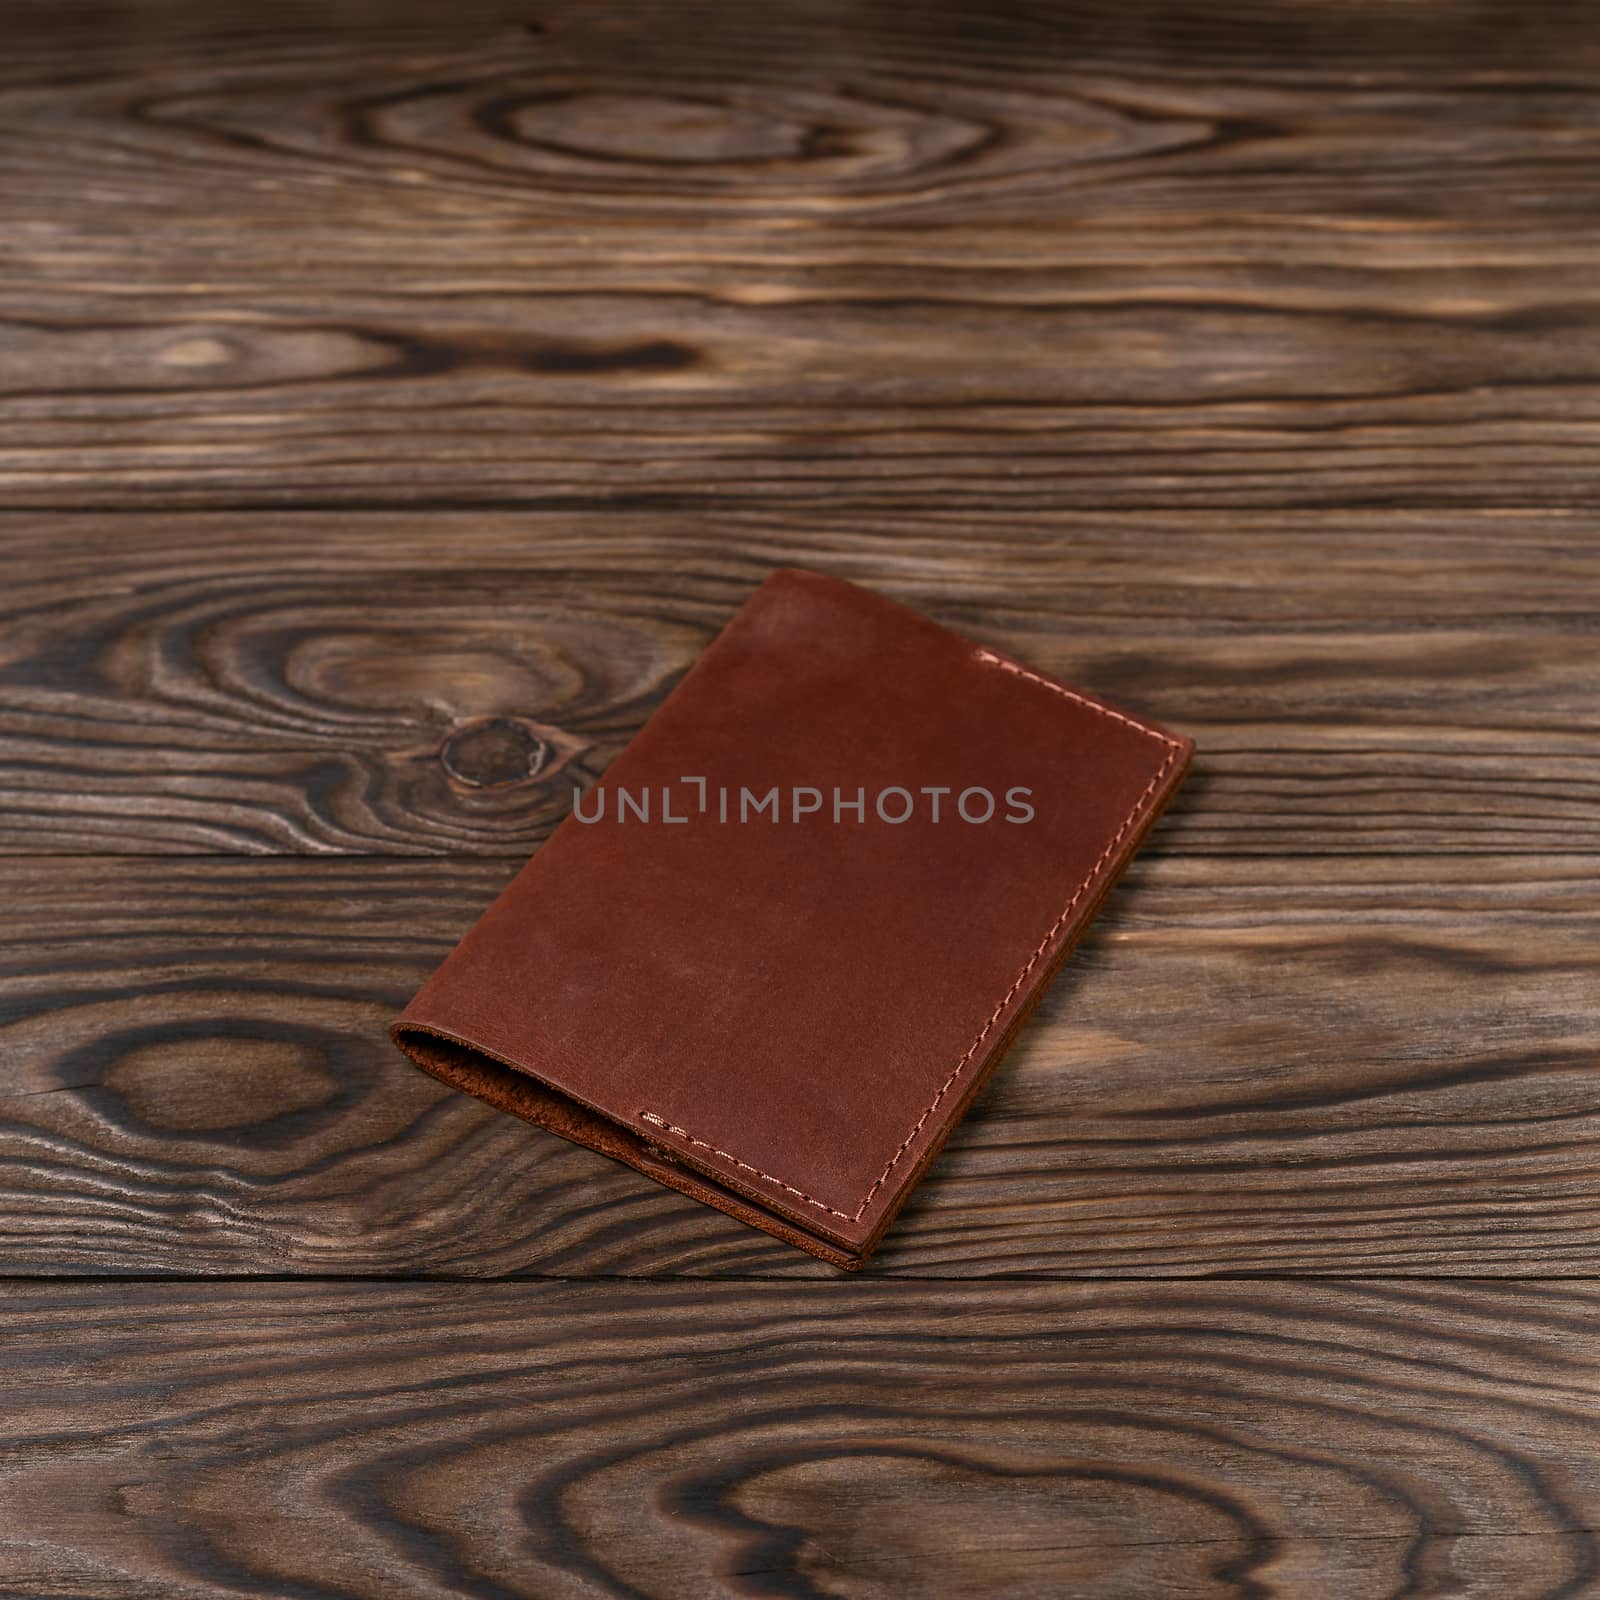 Ginger color handmade leather passport cover on wooden textured background. Businessman`s accessory. by alexsdriver